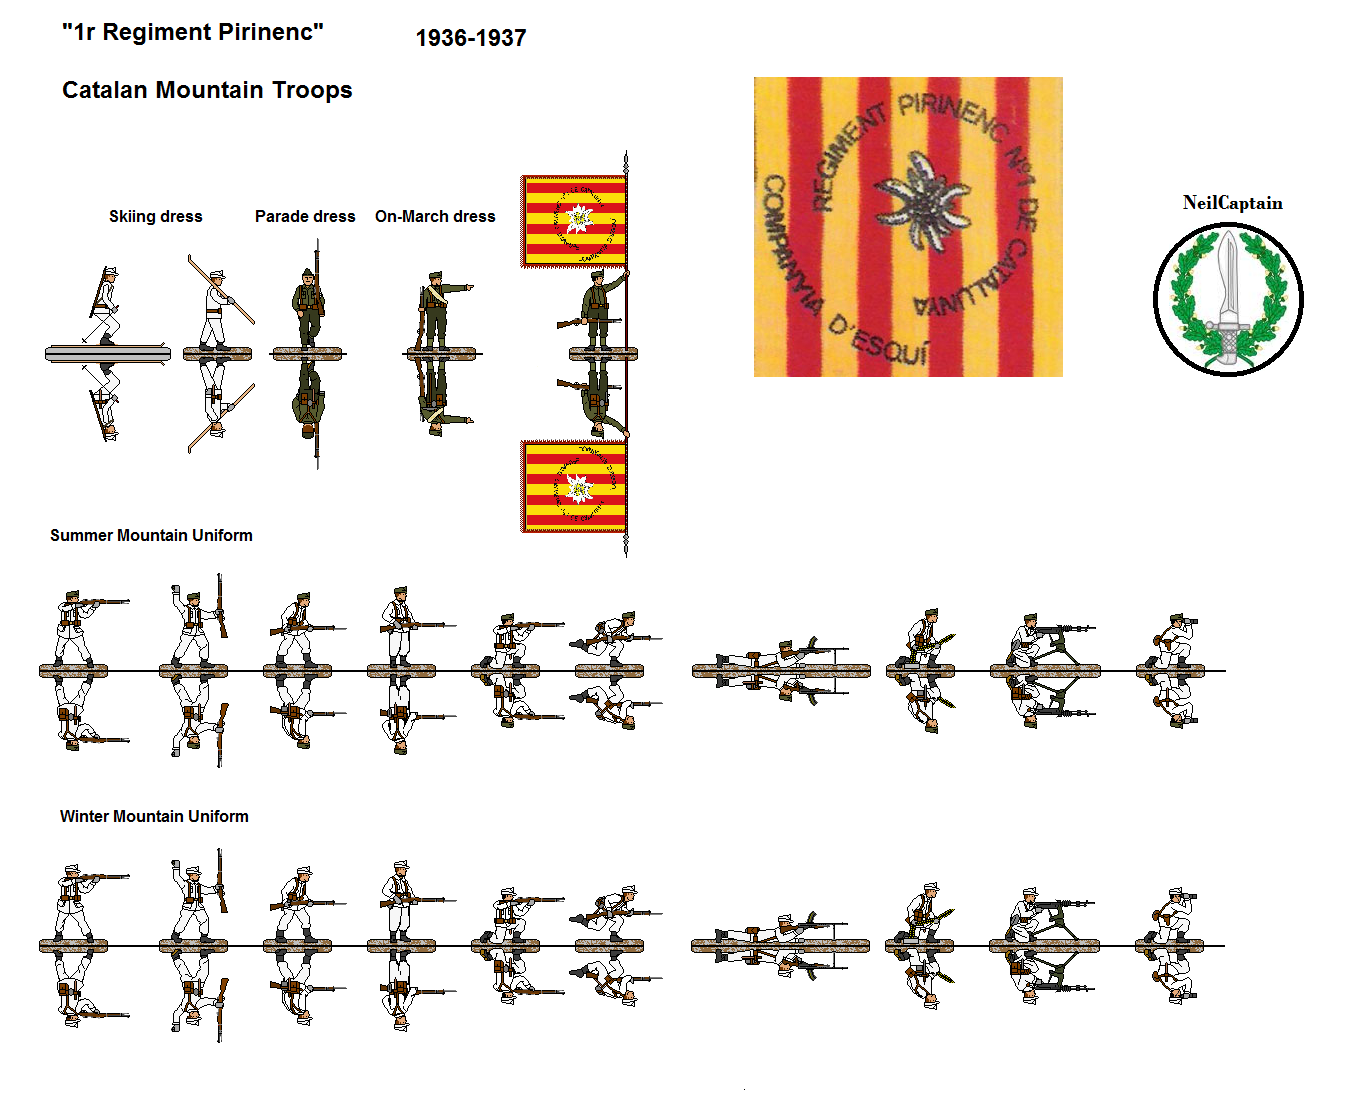 Catalan Mountain Troops